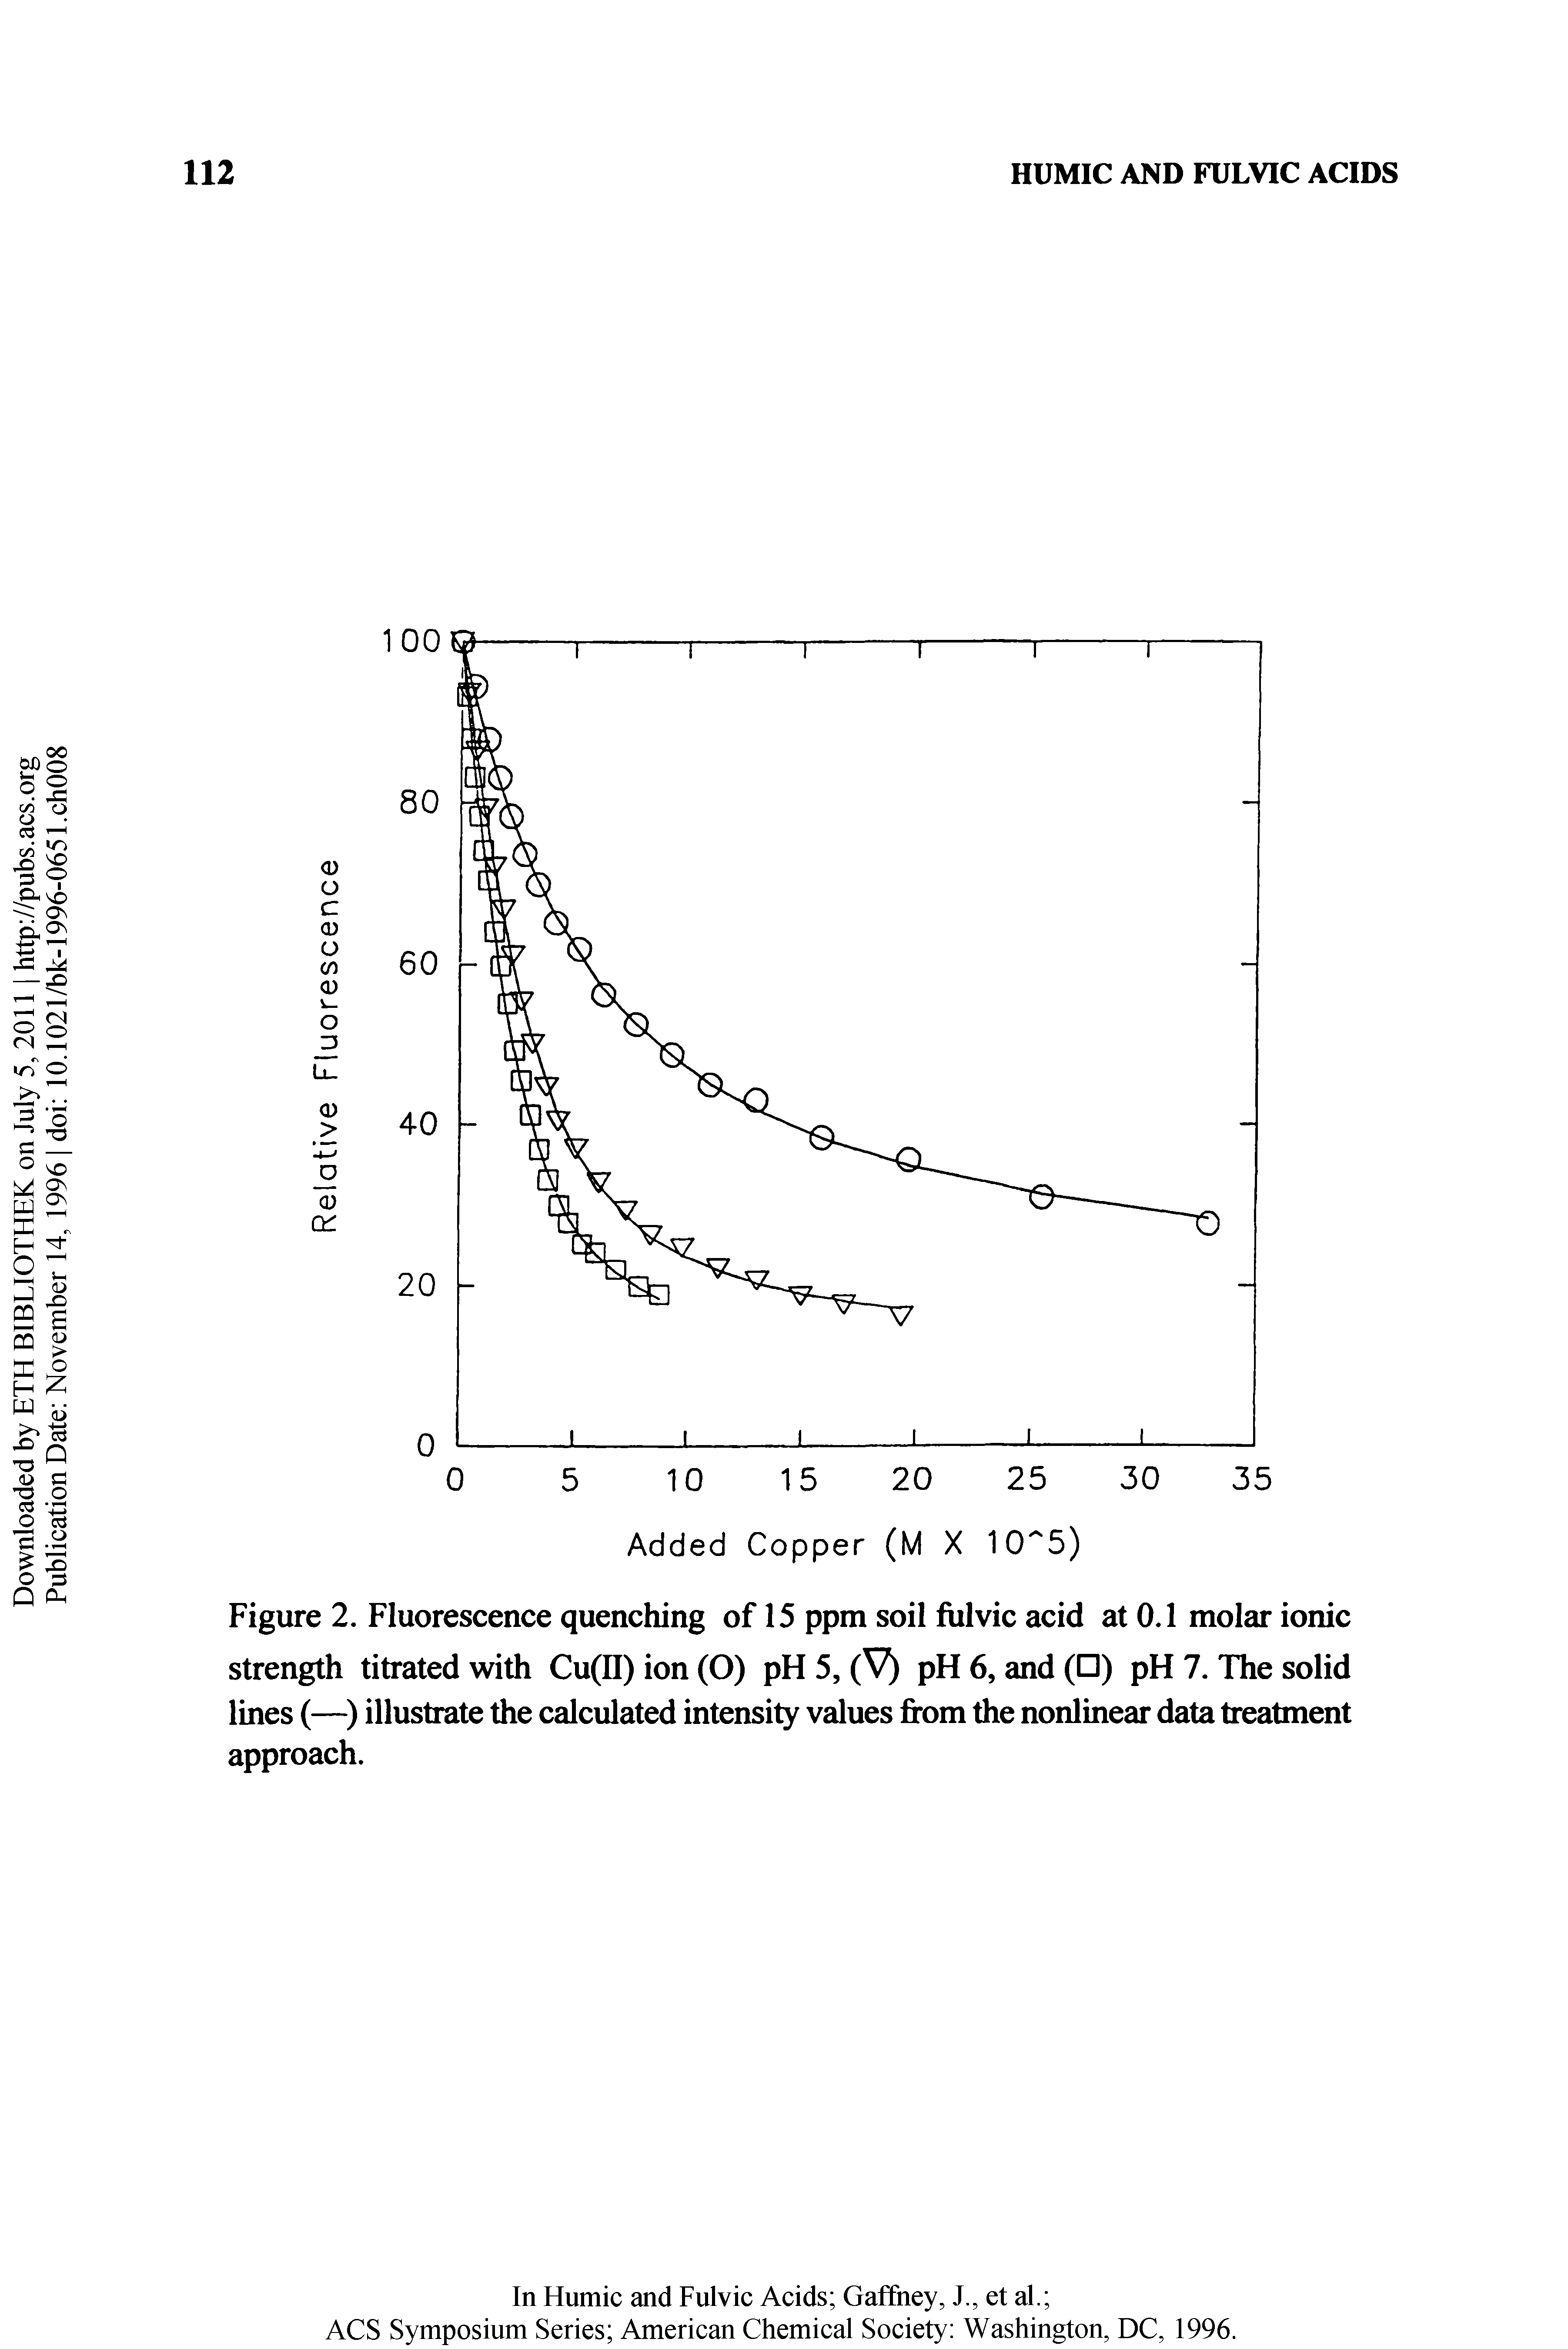 Figure 2. Fluorescence quenching of 15 ppm soil fulvic acid at 0.1 molar ionic strength titrated with Cu(II) ion (O) pH 5, (V) pH 6, and ( ) pH 7. The solid lines (—) illustrate the calculated intensity values from the nonlinear data treatment approach.